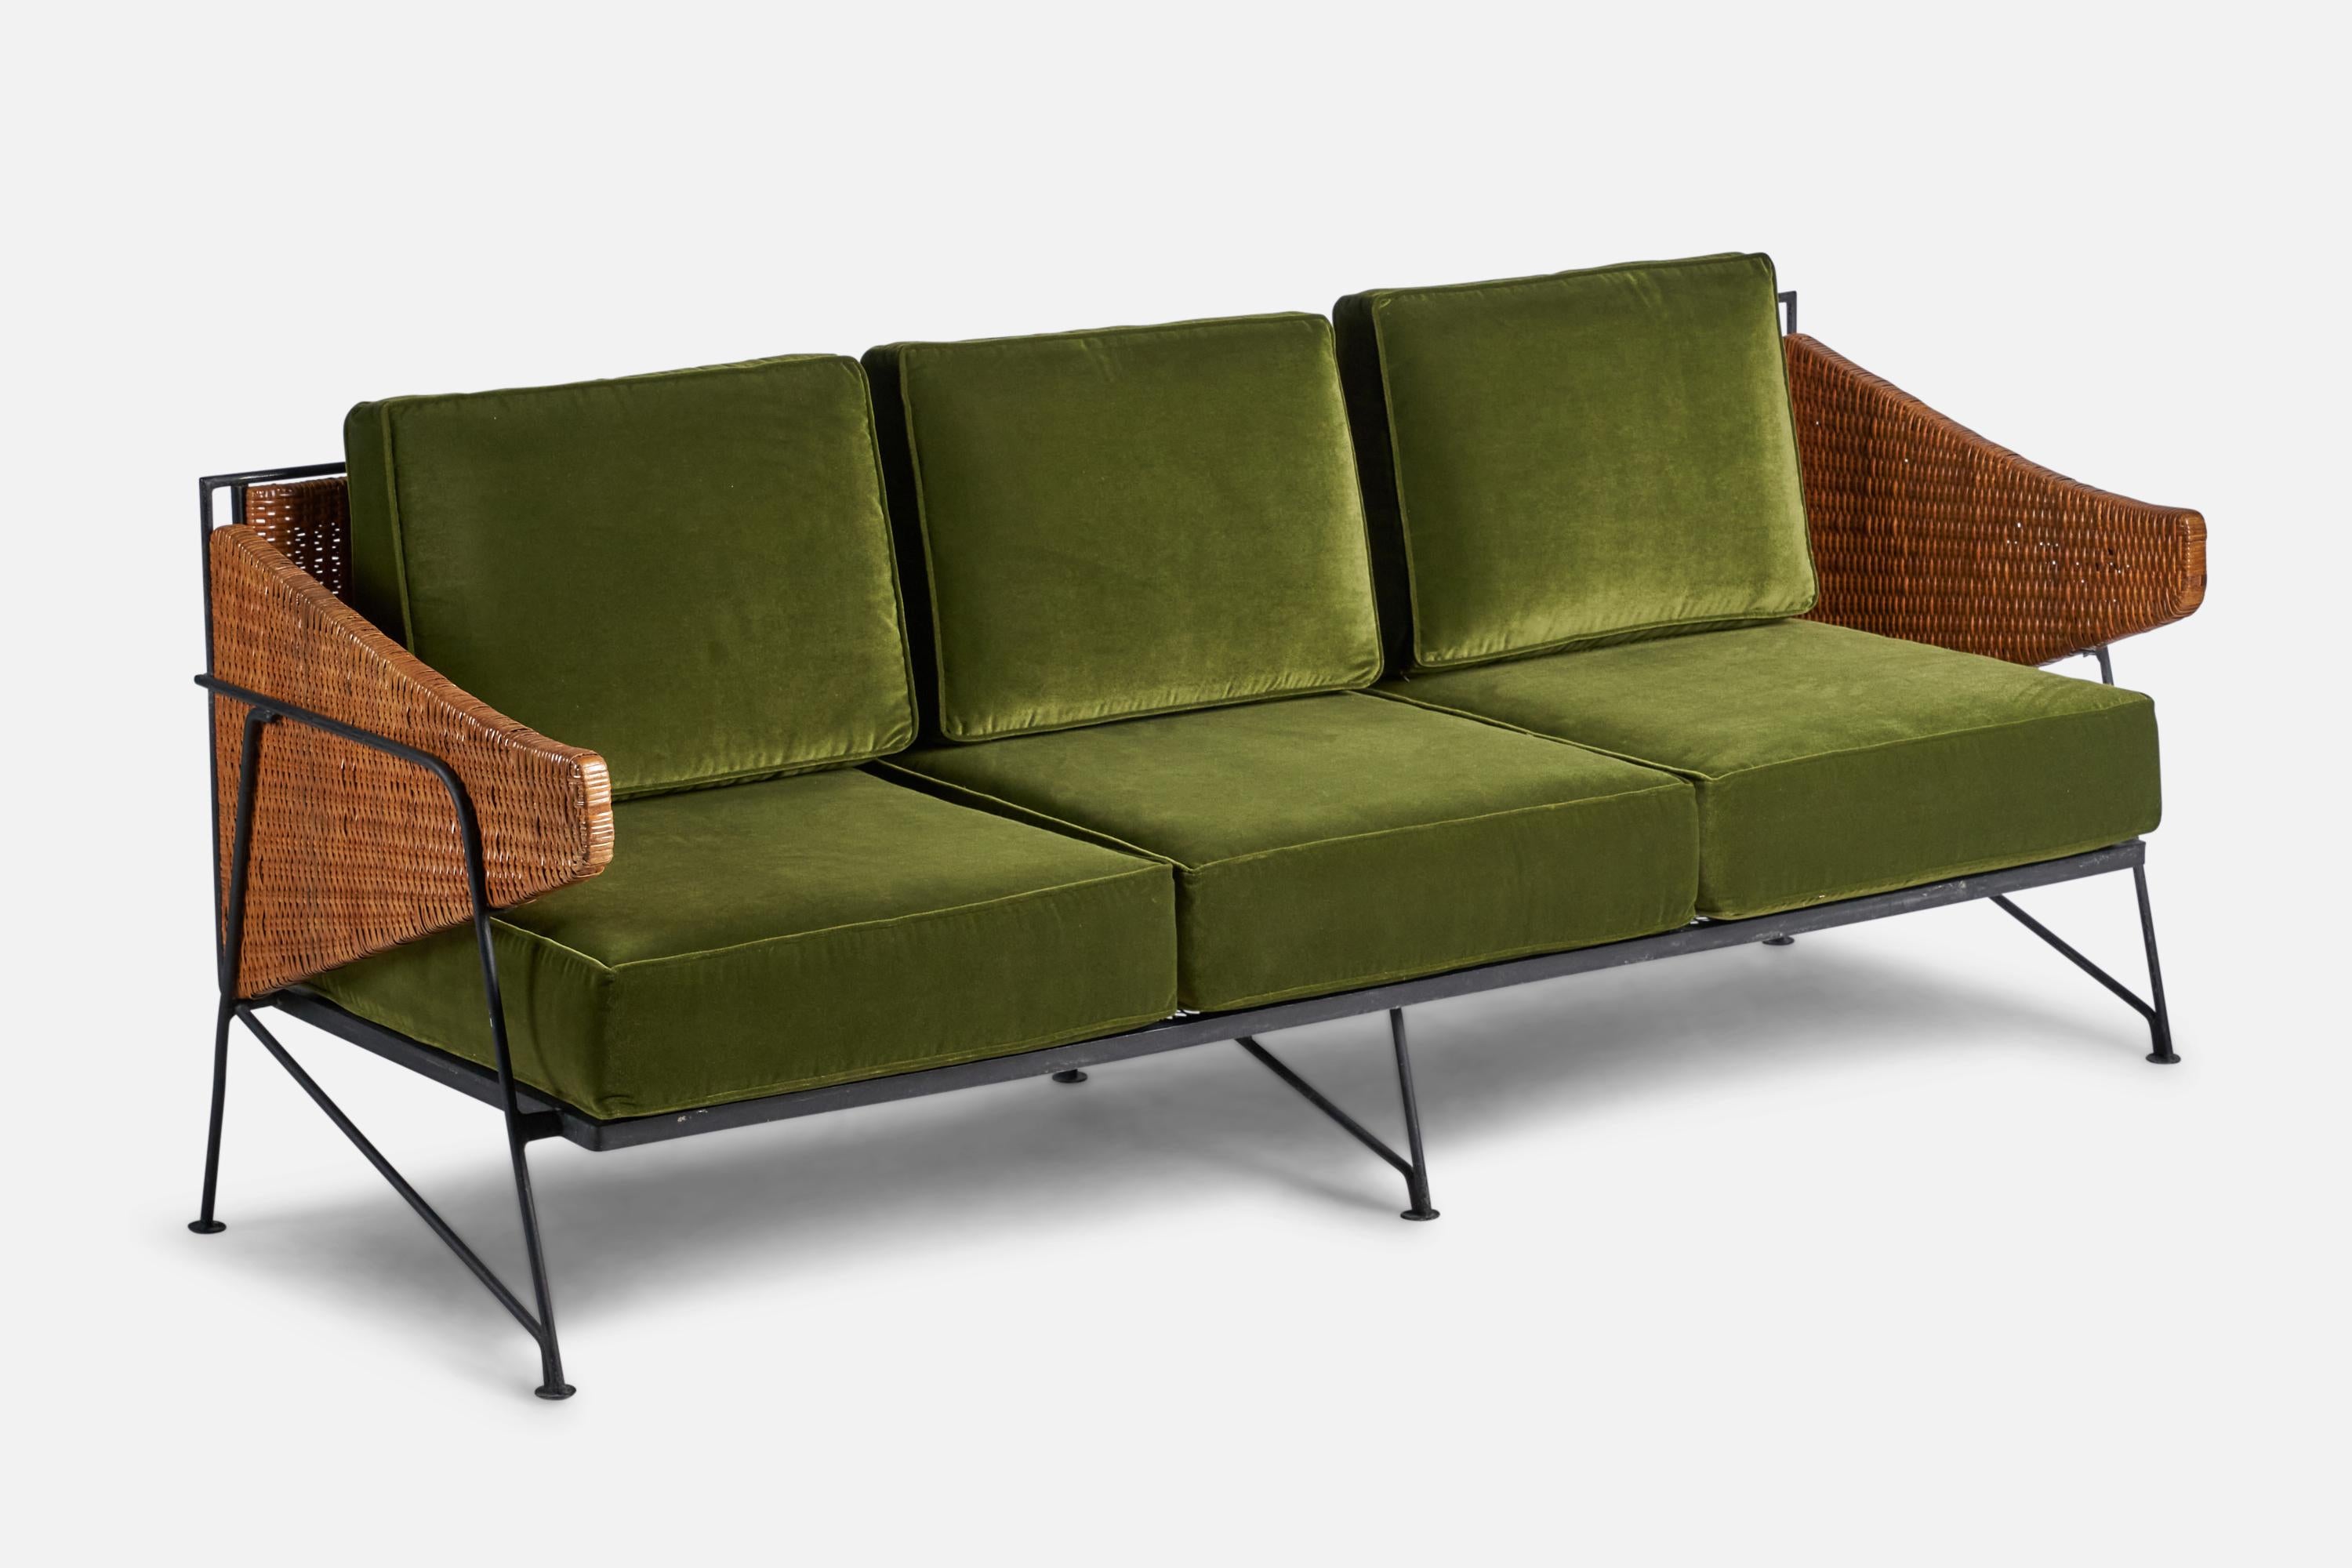 A black-lacquered iron, rattan and green velvet sofa designed and produced in the US, 1950. 

16.5” seat height
